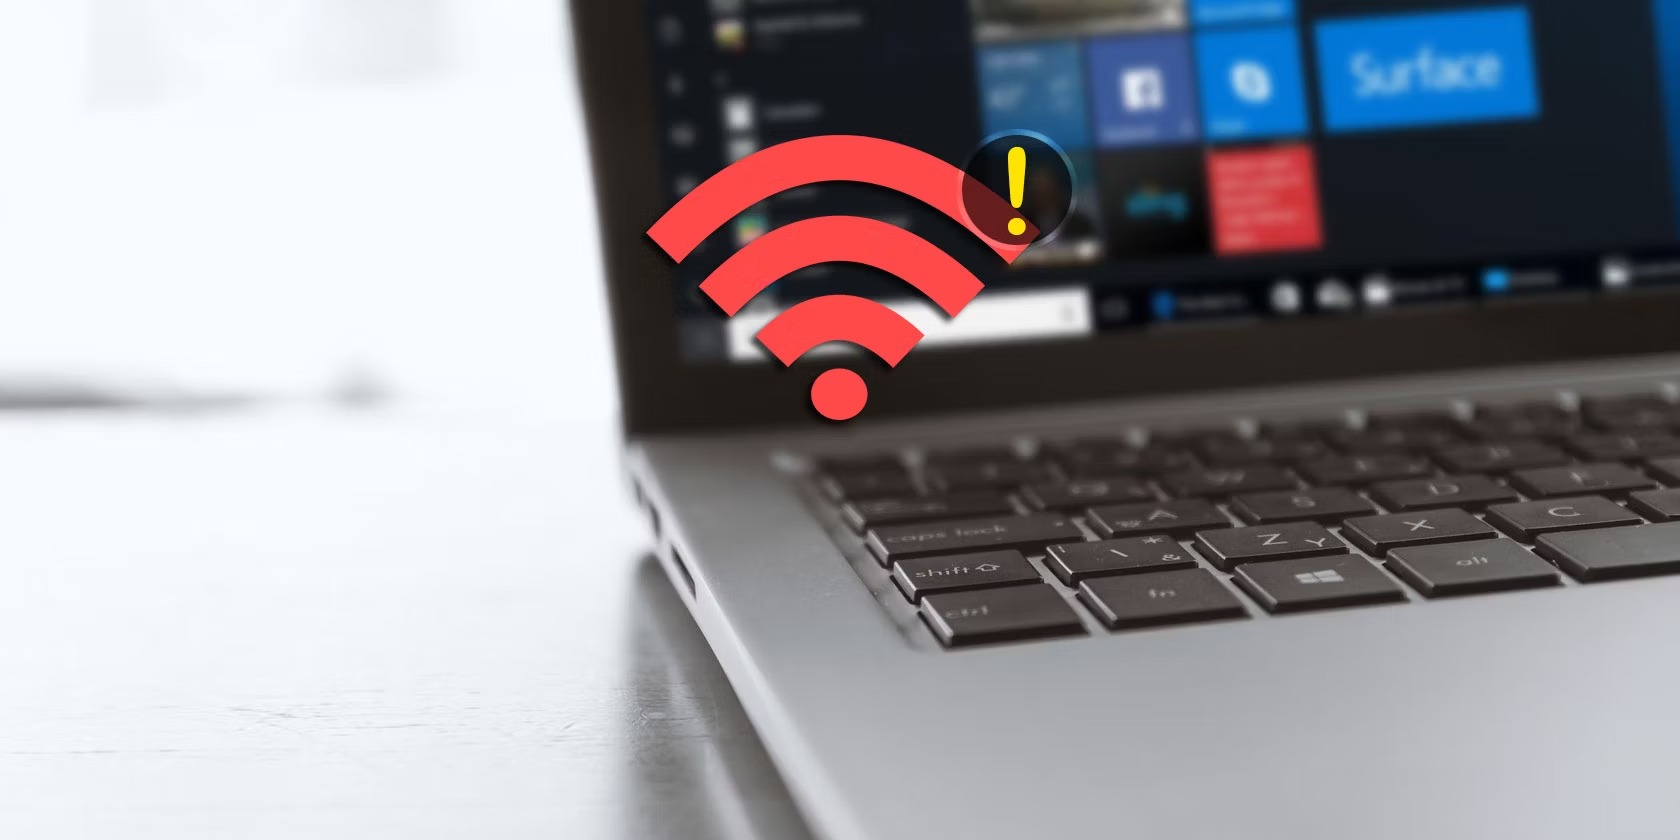 How To Fix It When Your Laptop Won’t Connect To Wi-Fi